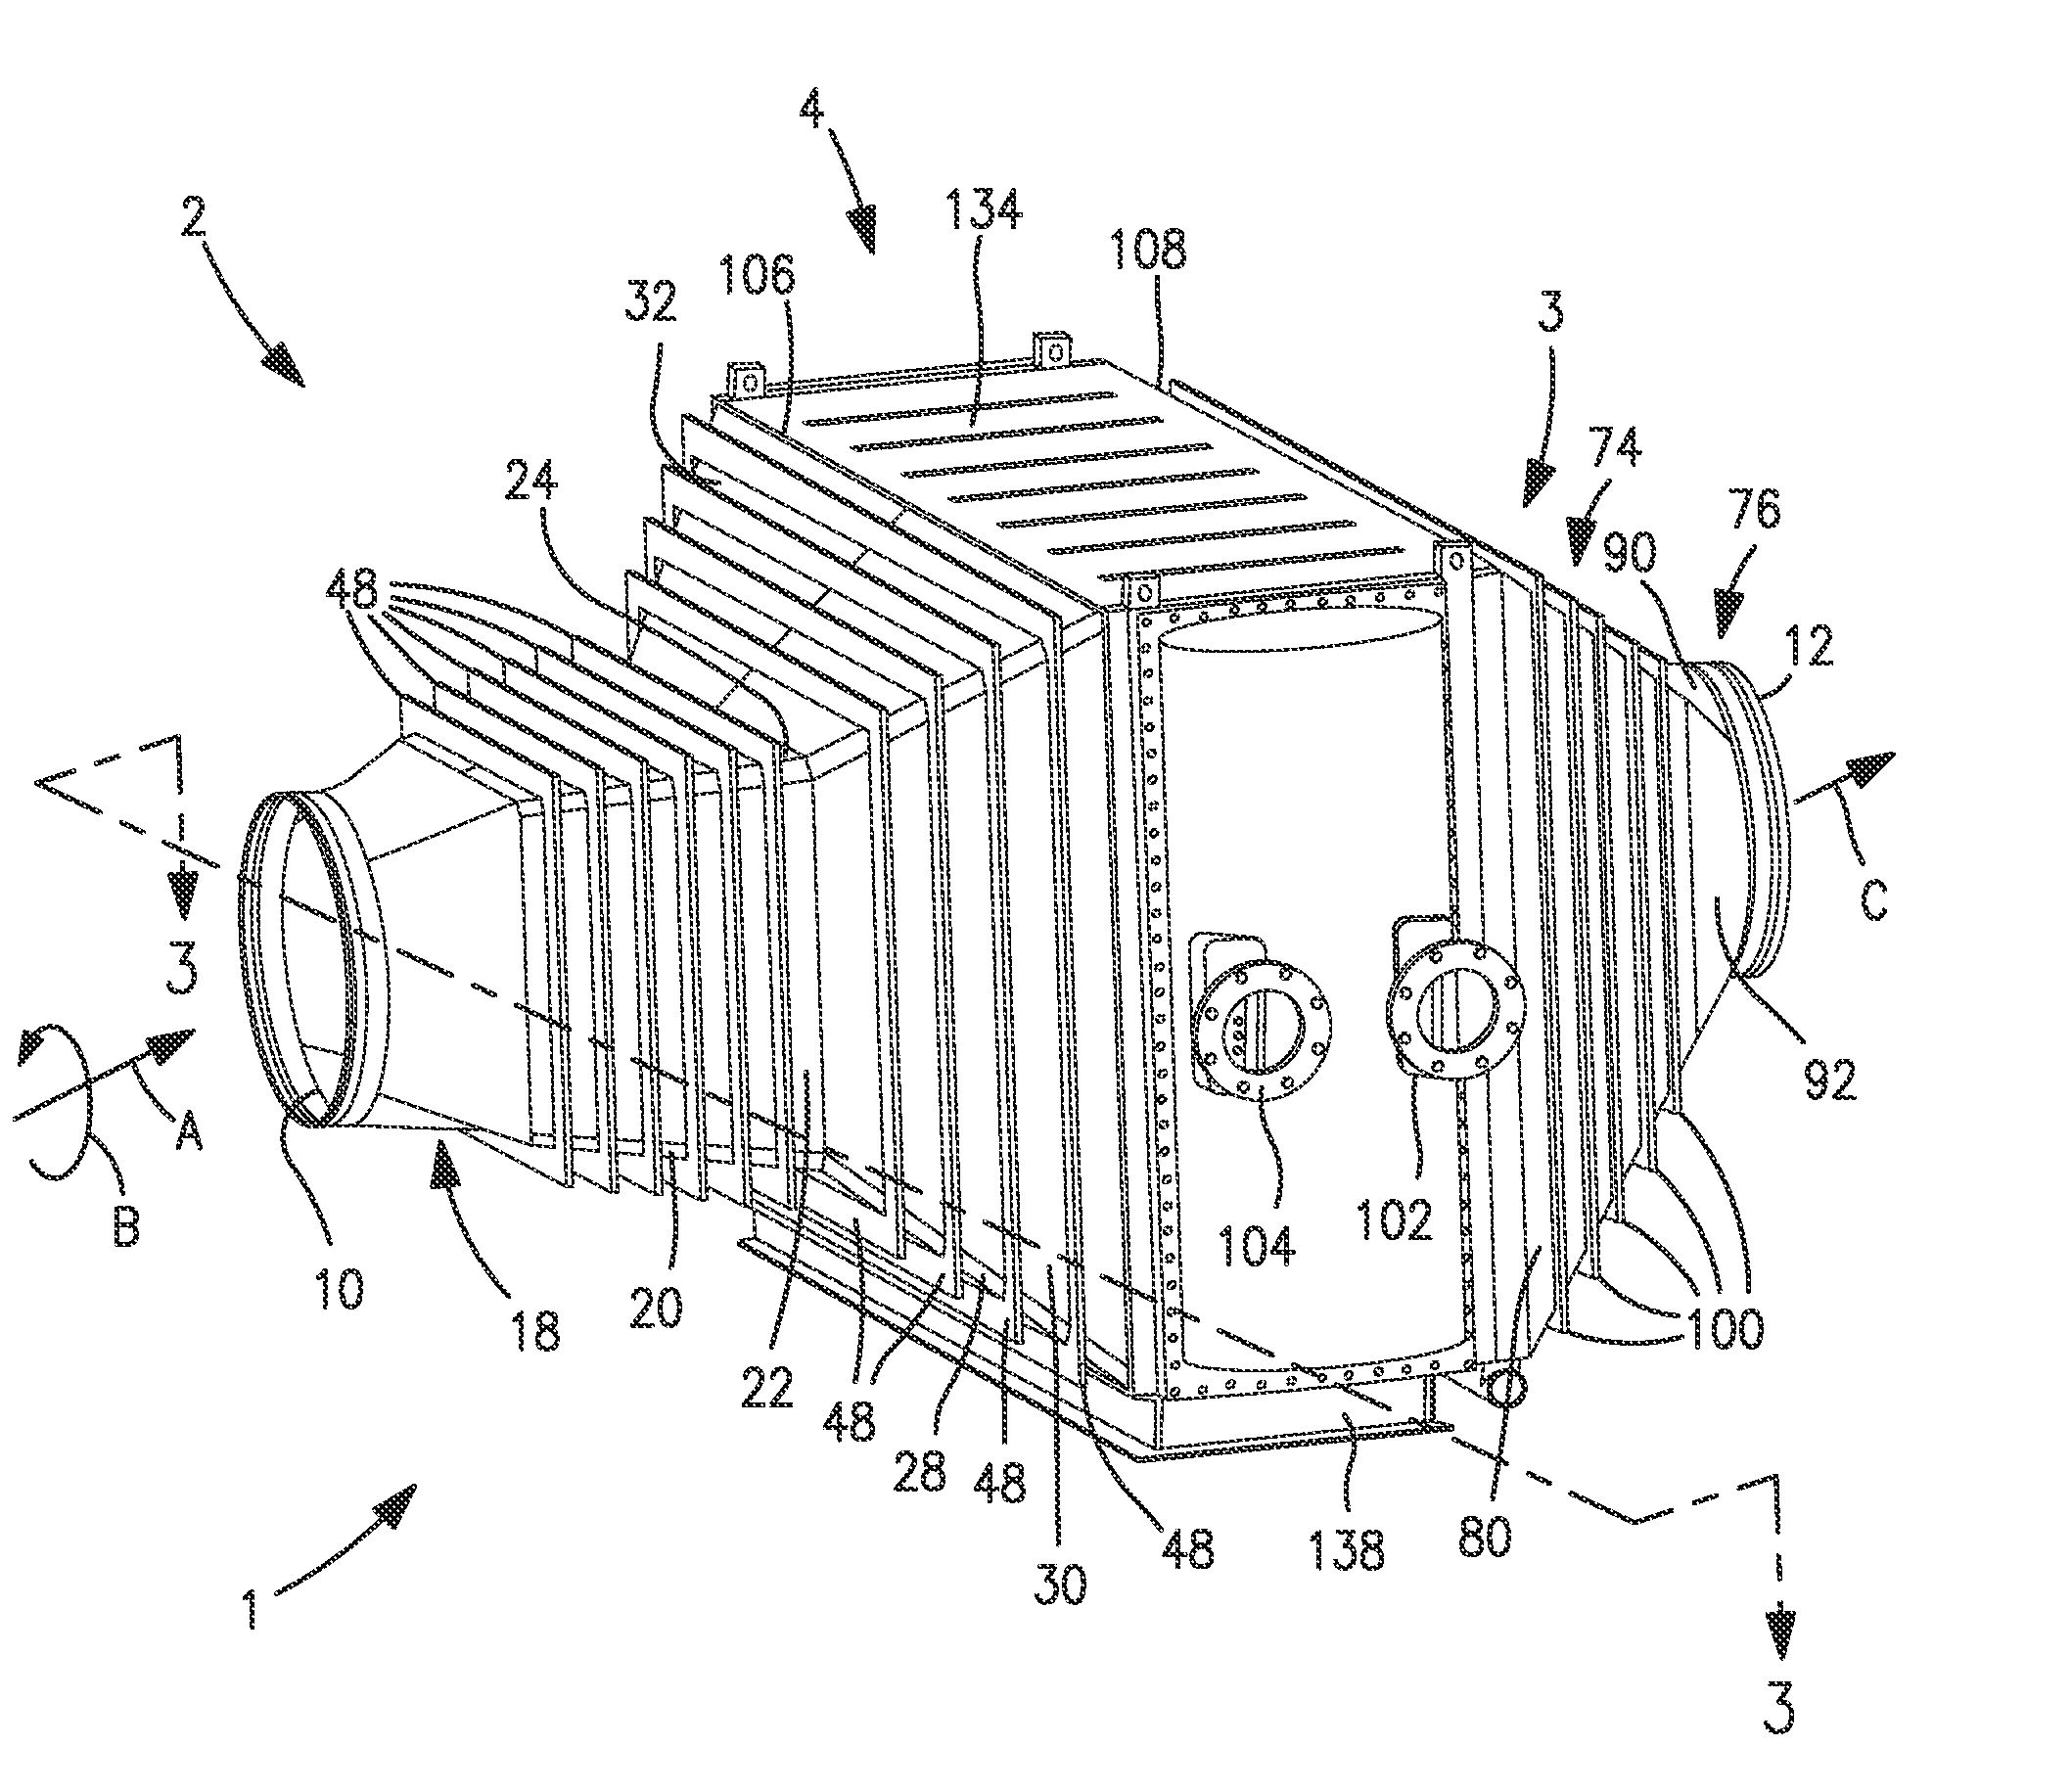 Compressed gas cooling apparatus